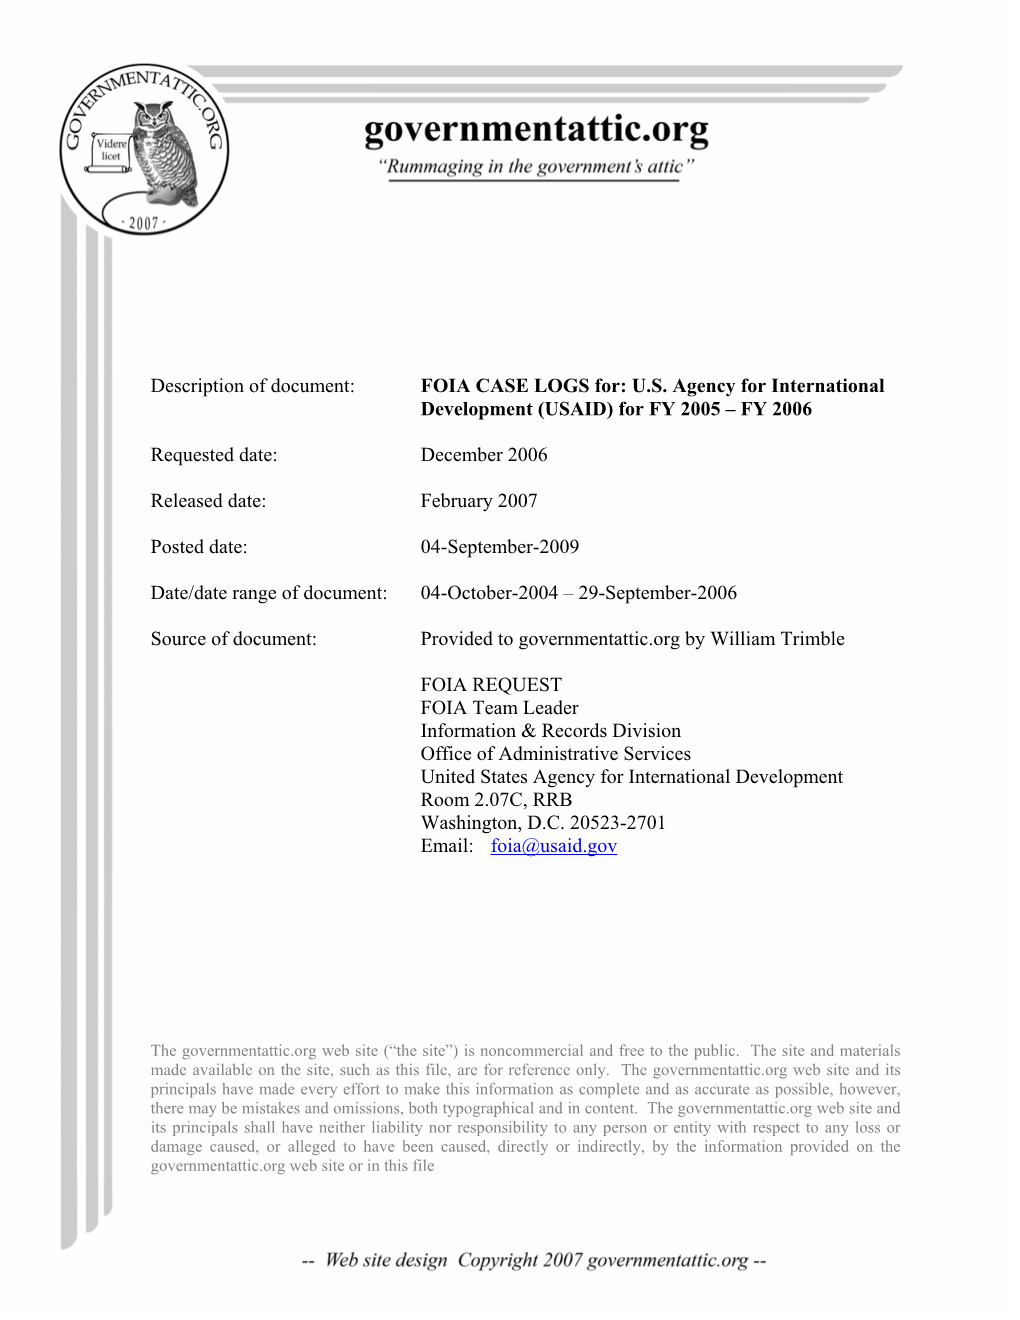 FOIA CASE LOGS For: U.S. Agency for International Development (USAID) for FY 2005 – FY 2006